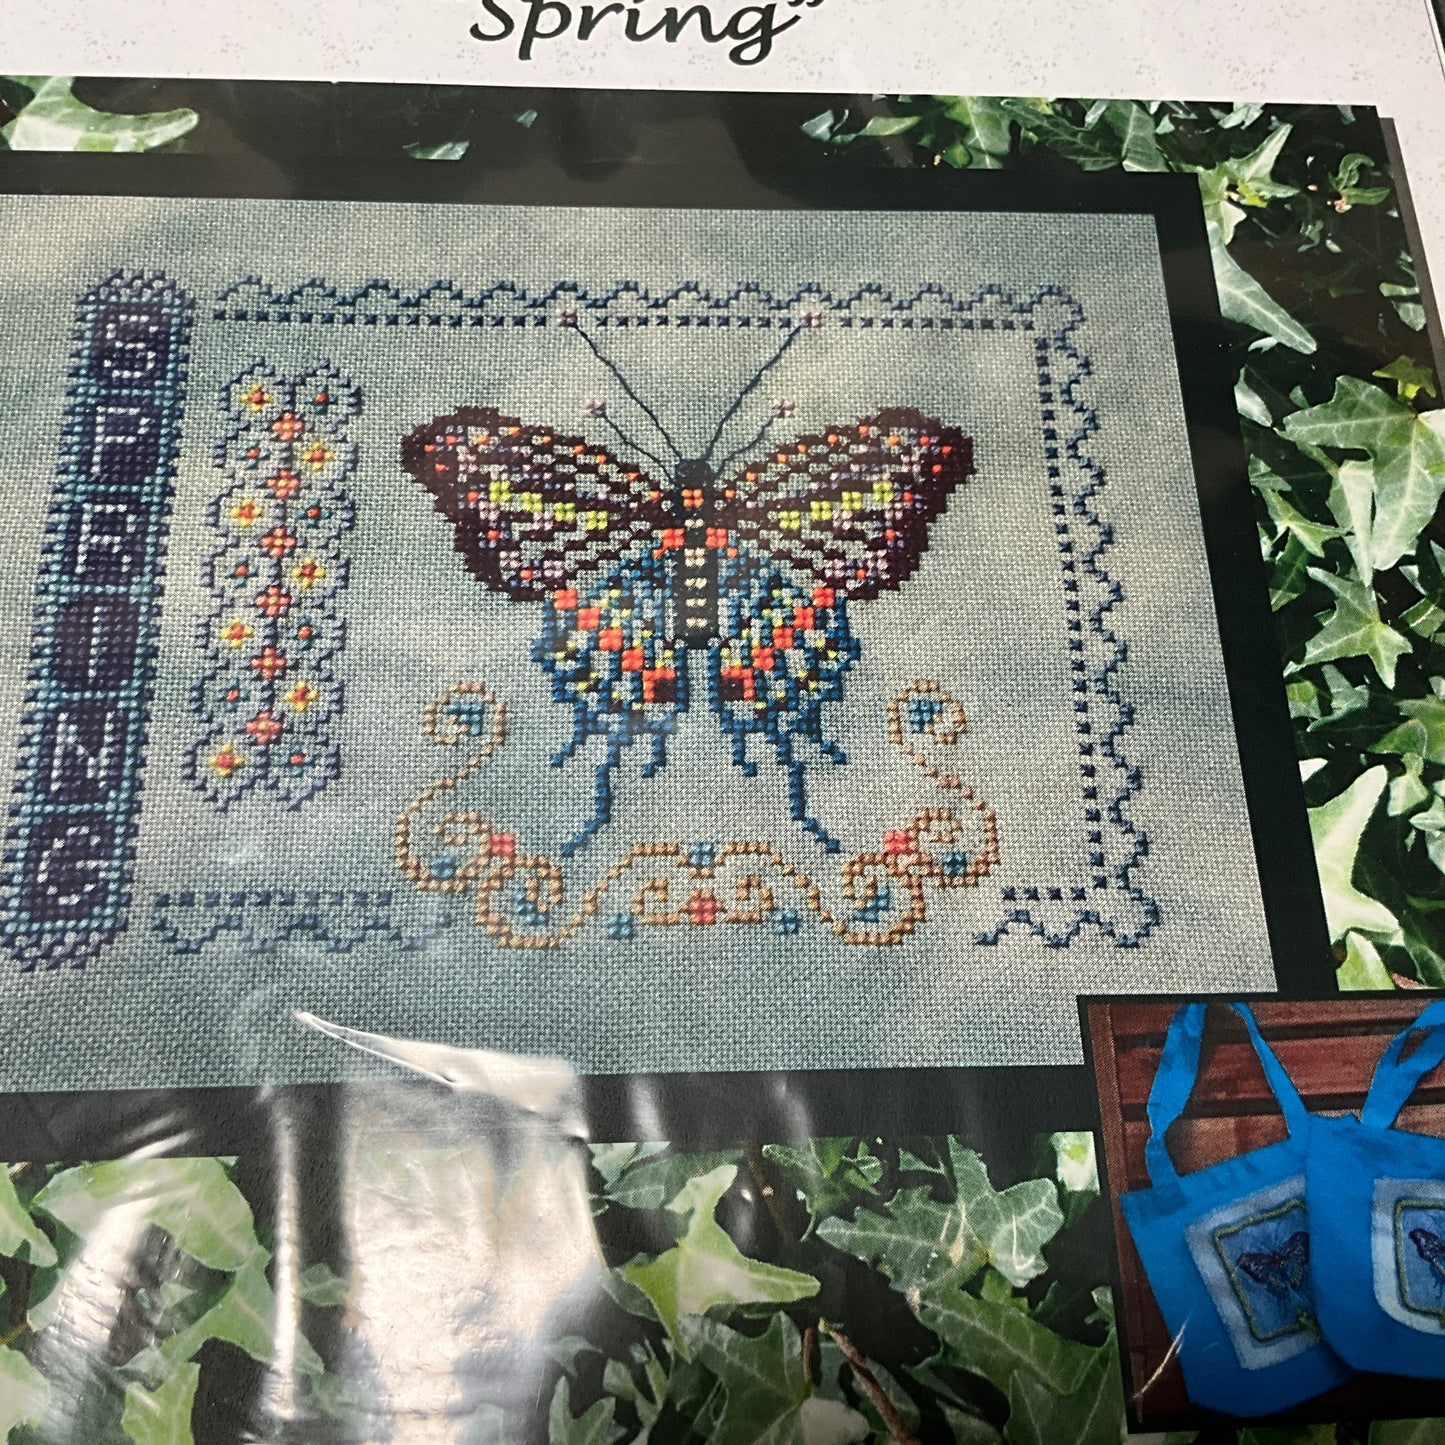 Turquoise Graphics & Designs Spring butterfly needlecraft chart stitch count 97 by 67